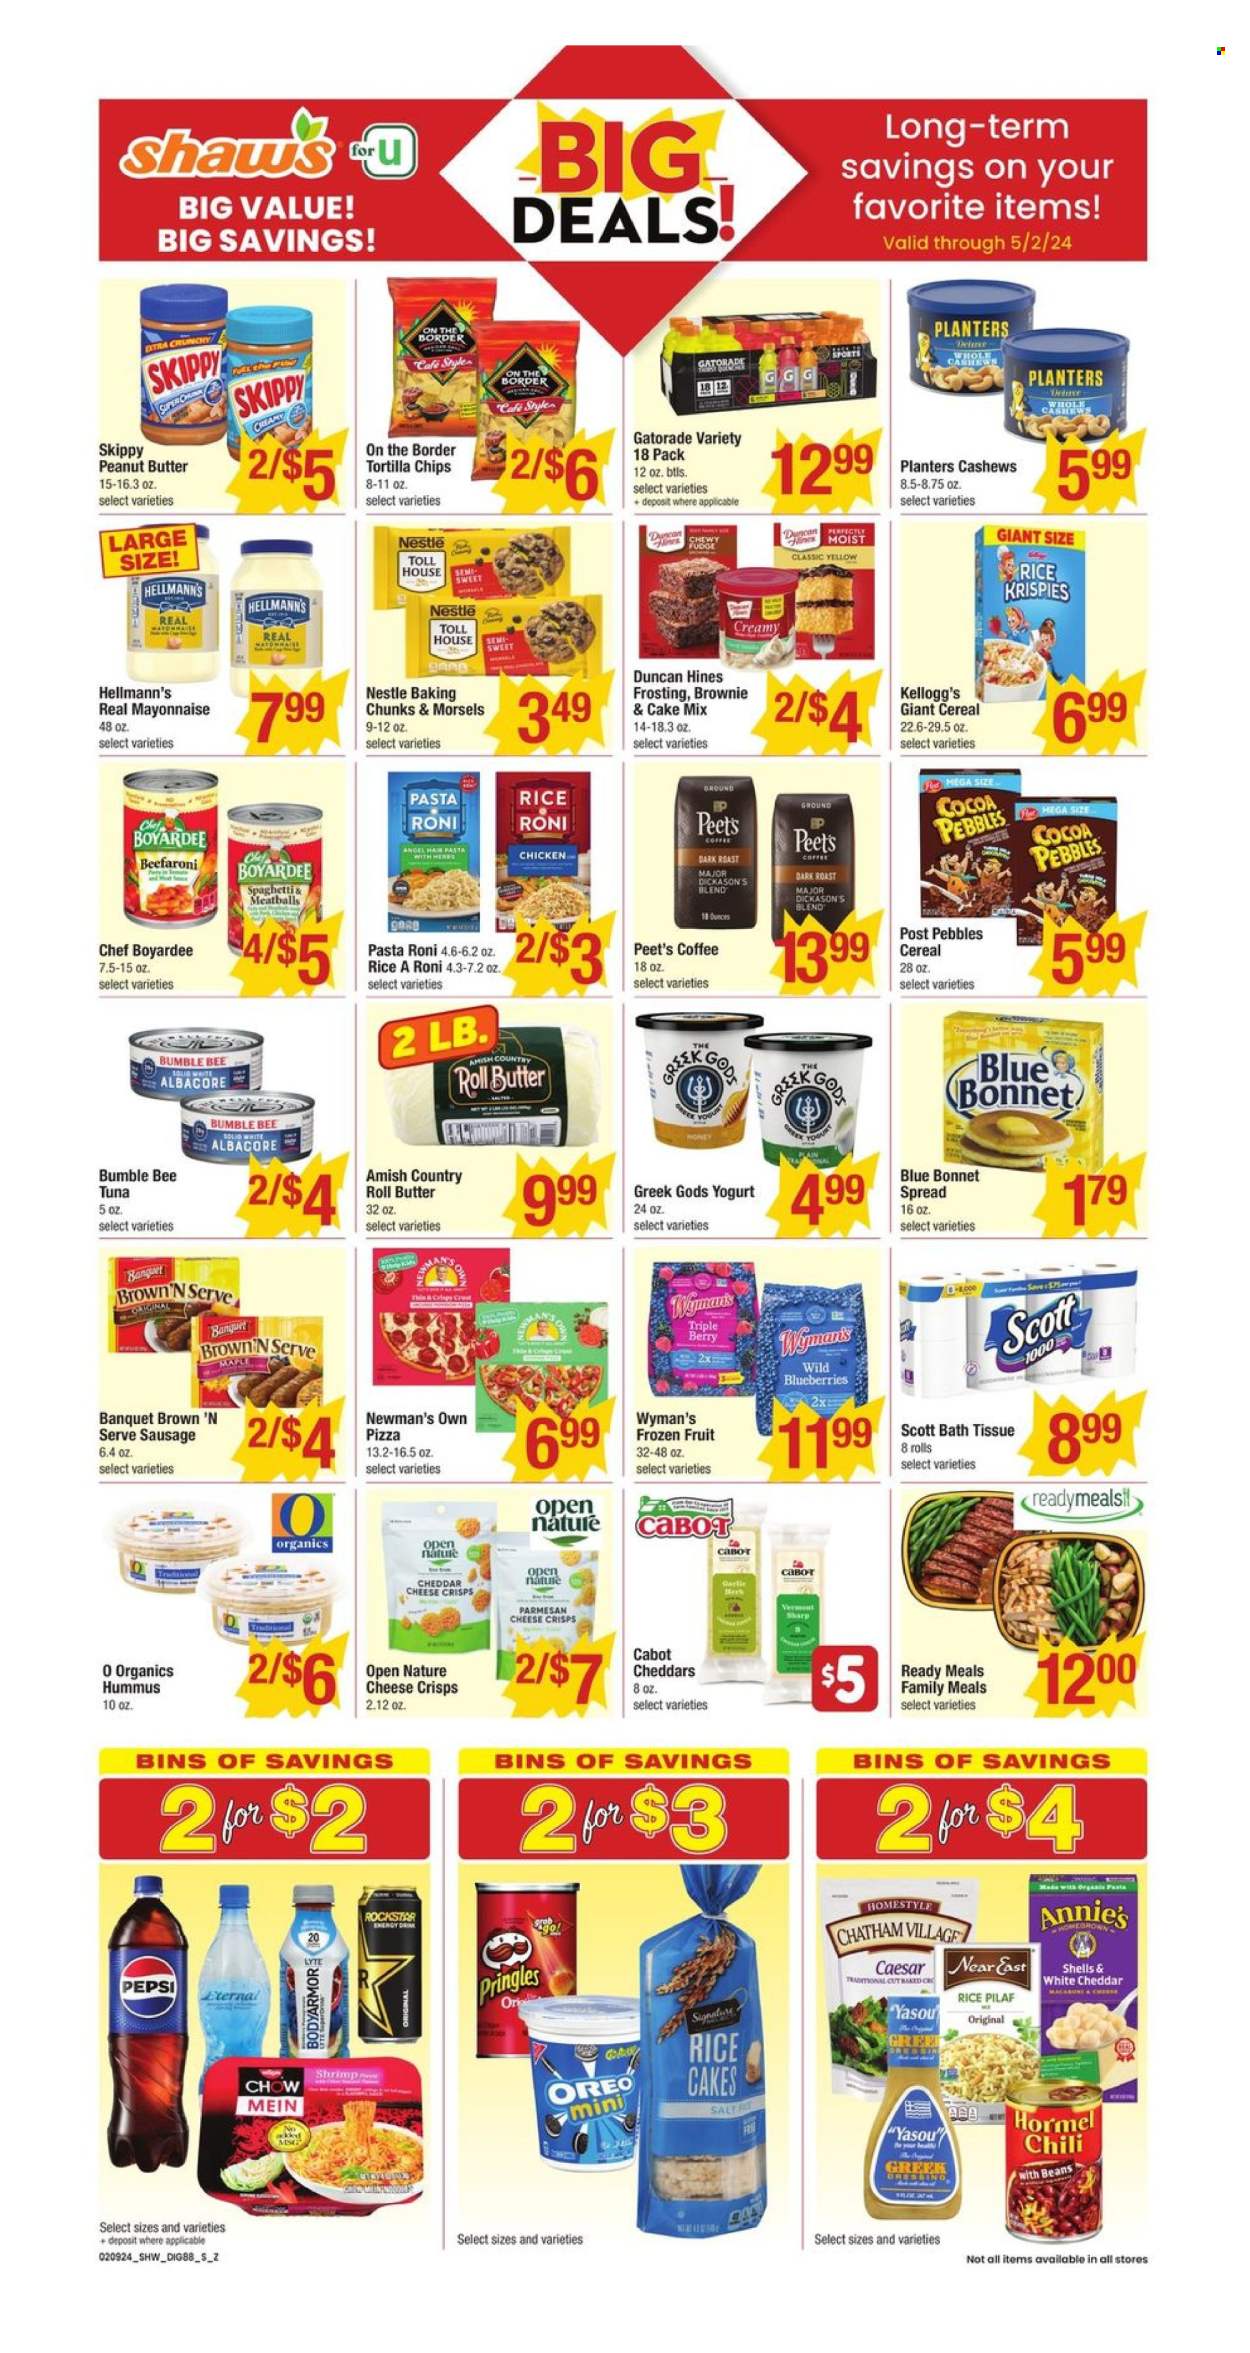 thumbnail - Shaw’s Flyer - 02/09/2024 - 05/02/2024 - Sales products - Brown 'N Serve, rice cakes, cake mix, blueberries, tuna, shrimps, spaghetti, pizza, meatballs, pasta, Bumble Bee, Annie's, pasta sides, Hormel, ready meal, rice sides, cheddar, parmesan, greek yoghurt, Oreo, yoghurt, margarine, mayonnaise, Hellmann’s, frozen fruit, Nestlé, Kellogg's, tortilla chips, Pringles, chips, crisps, frosting, baking mix, Chef Boyardee, Rice Krispies, peanut butter, cashews, Planters, Pepsi, energy drink, soft drink, Gatorade, electrolyte drink, carbonated soft drink, coffee, chicken, bath tissue, Scott. Page 1.